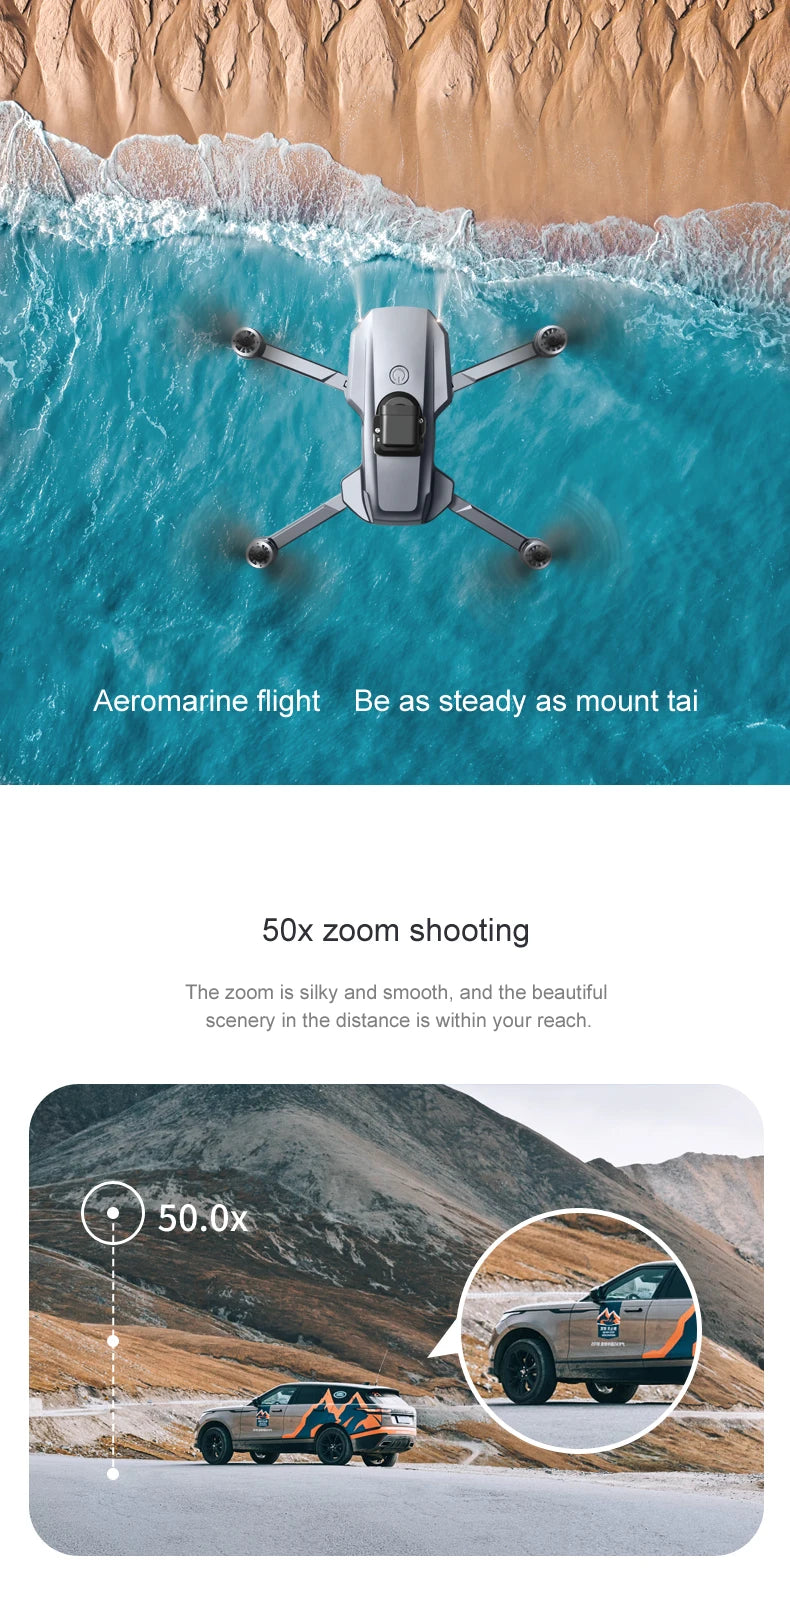 RG101 PRO Drone, mount tai 50x zoom shooting The zoom is silky and smooth, and the